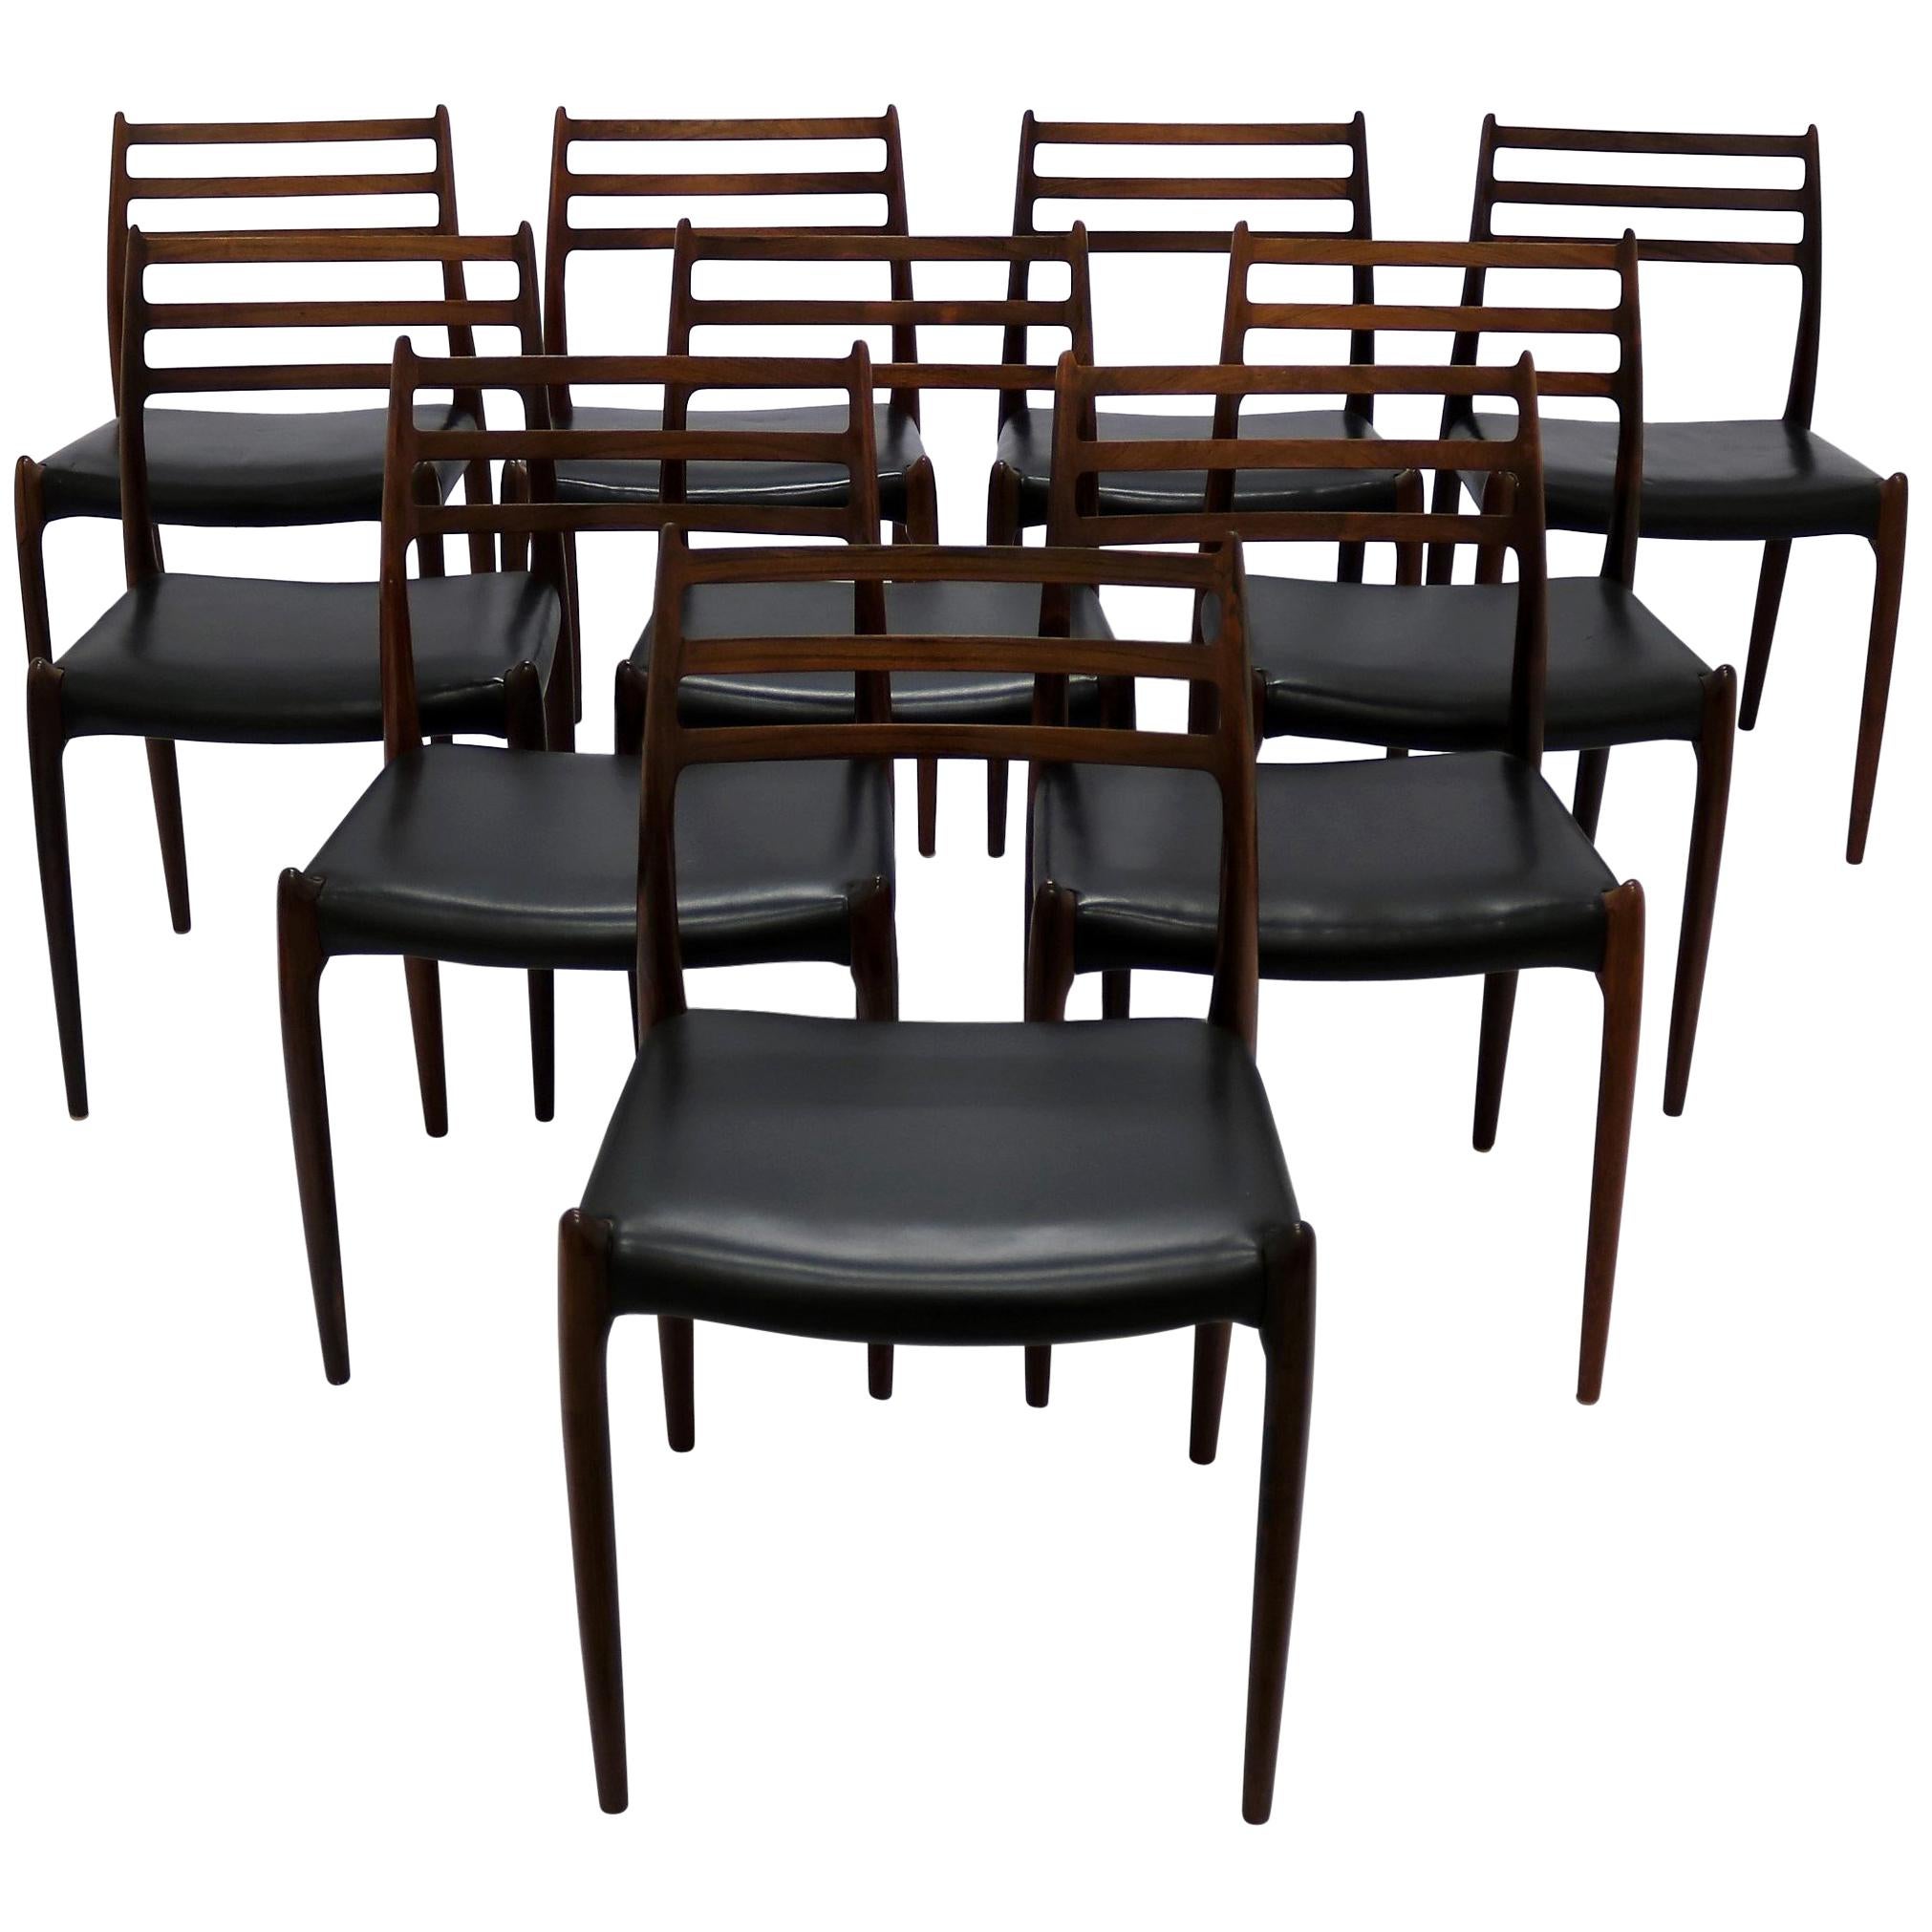 N.O. Moller, 10 Dining Chairs in Rosewood and Black Leather, Scandinavian Modern